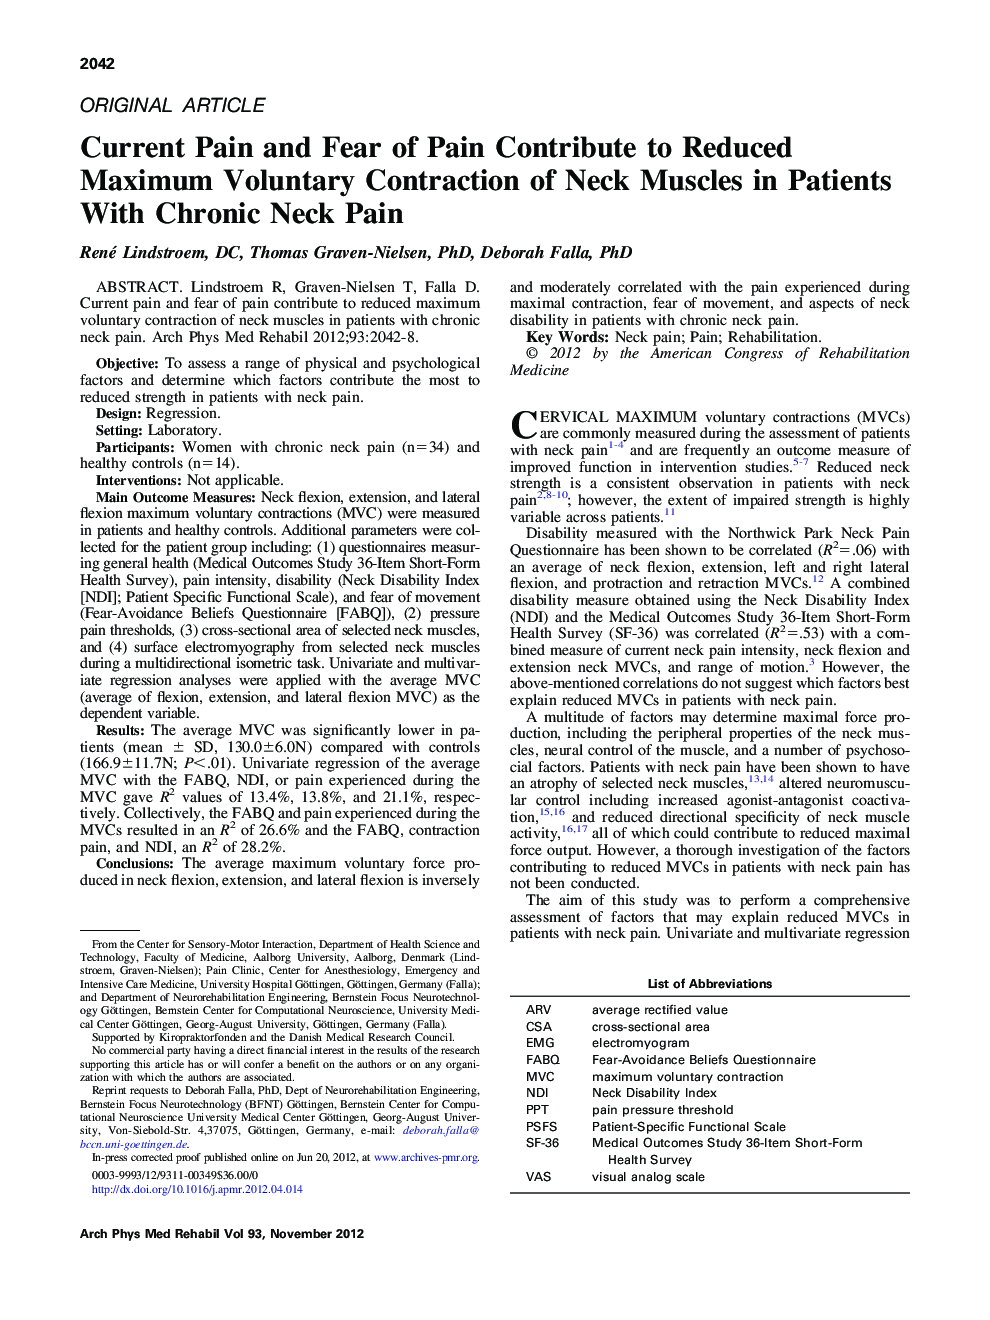 Current Pain and Fear of Pain Contribute to Reduced Maximum Voluntary Contraction of Neck Muscles in Patients With Chronic Neck Pain 